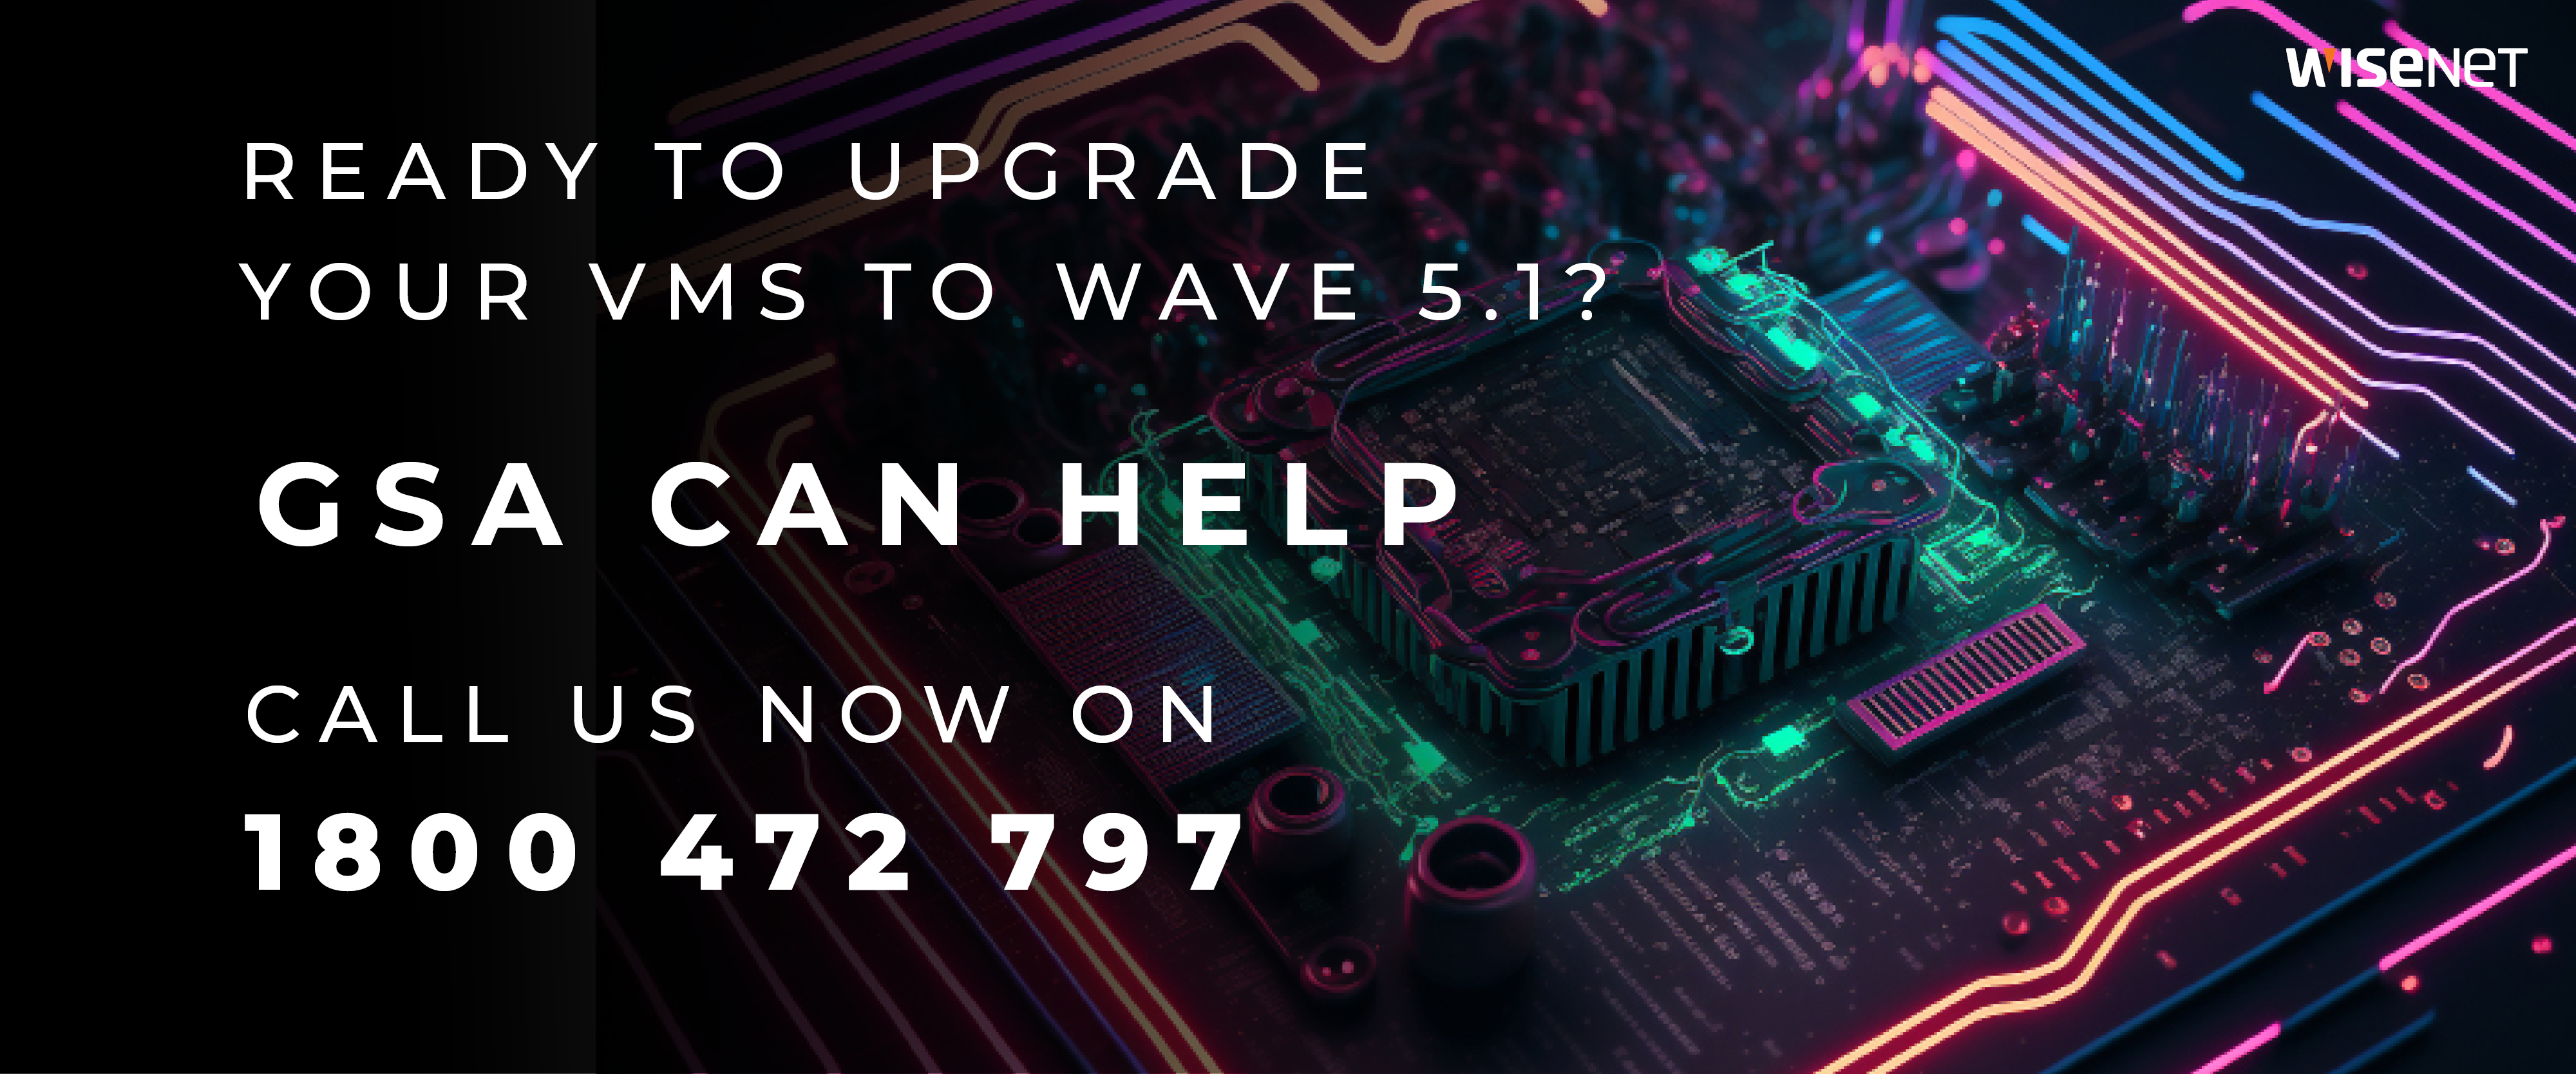 ready to upgrade your VMS to wave 5.1? Call GSA today